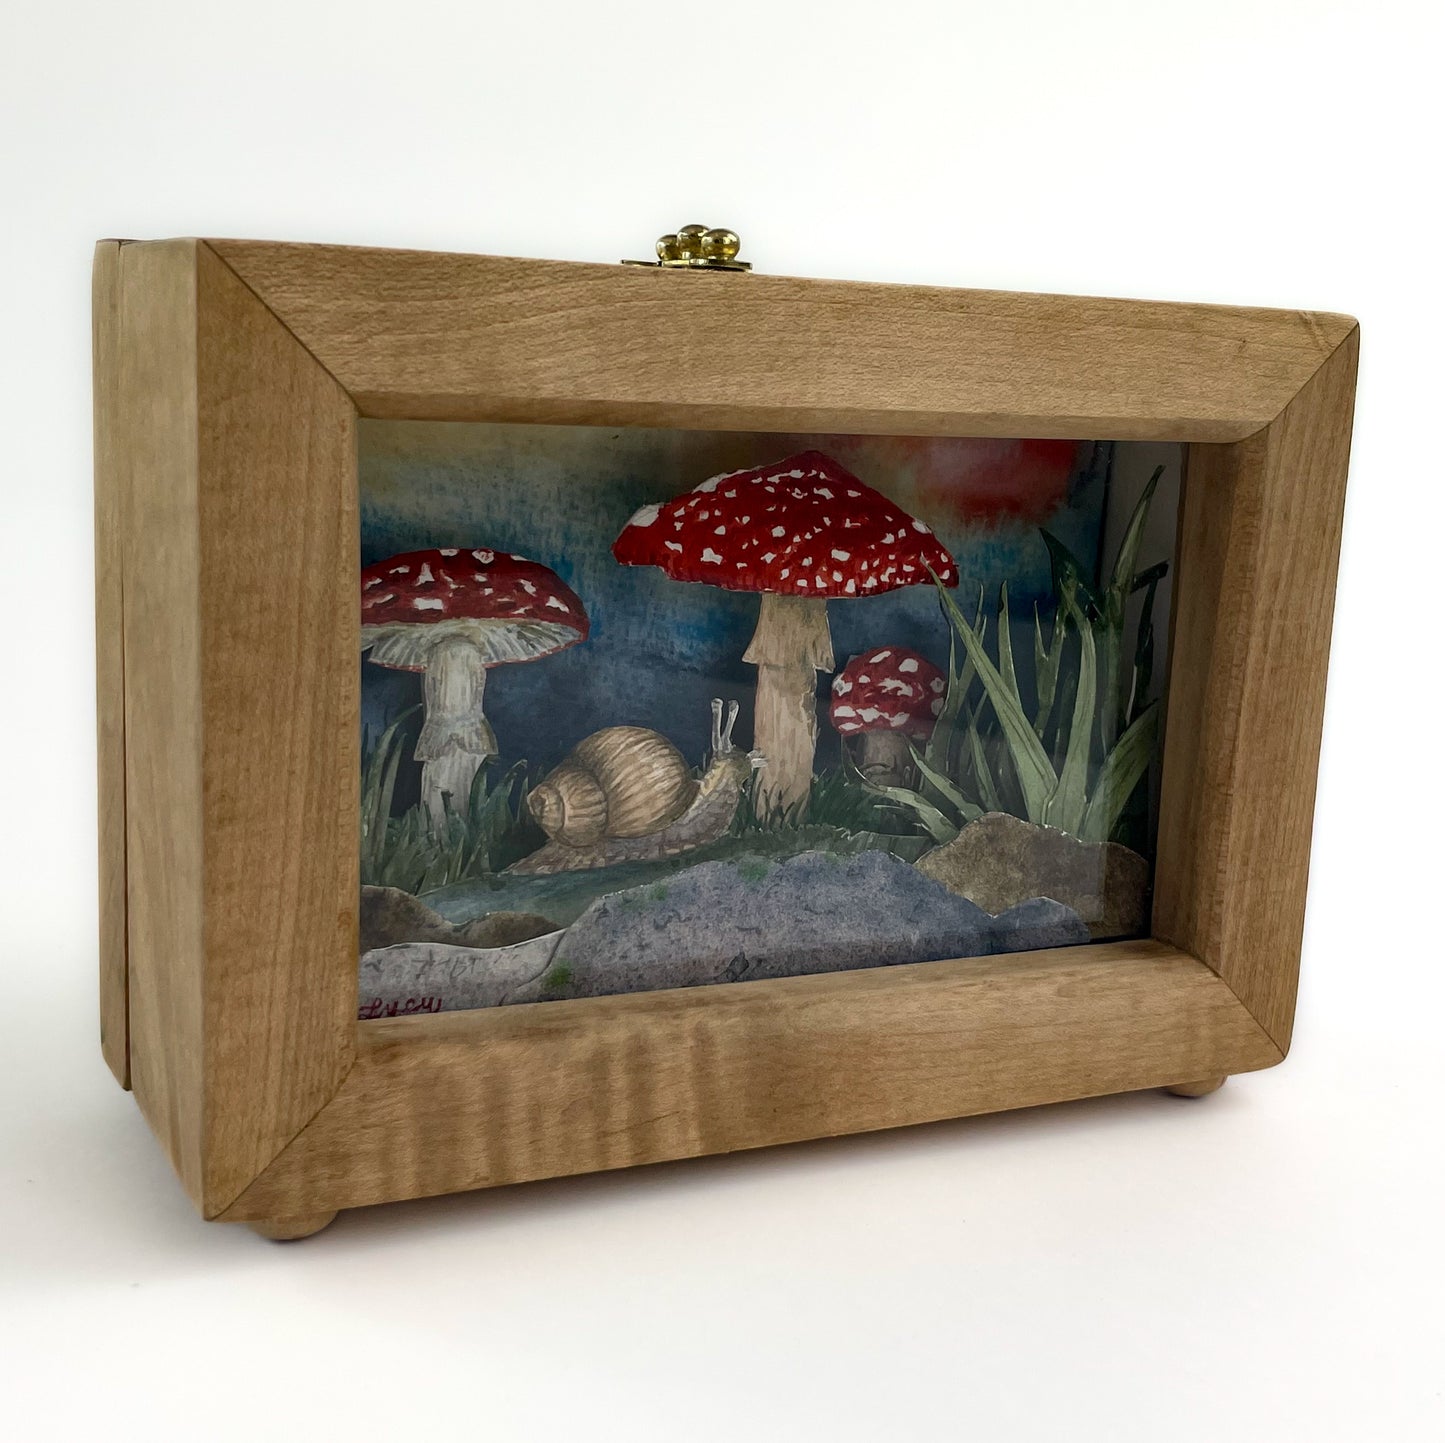 Forest Floor Watercolour Diorama by Lucy